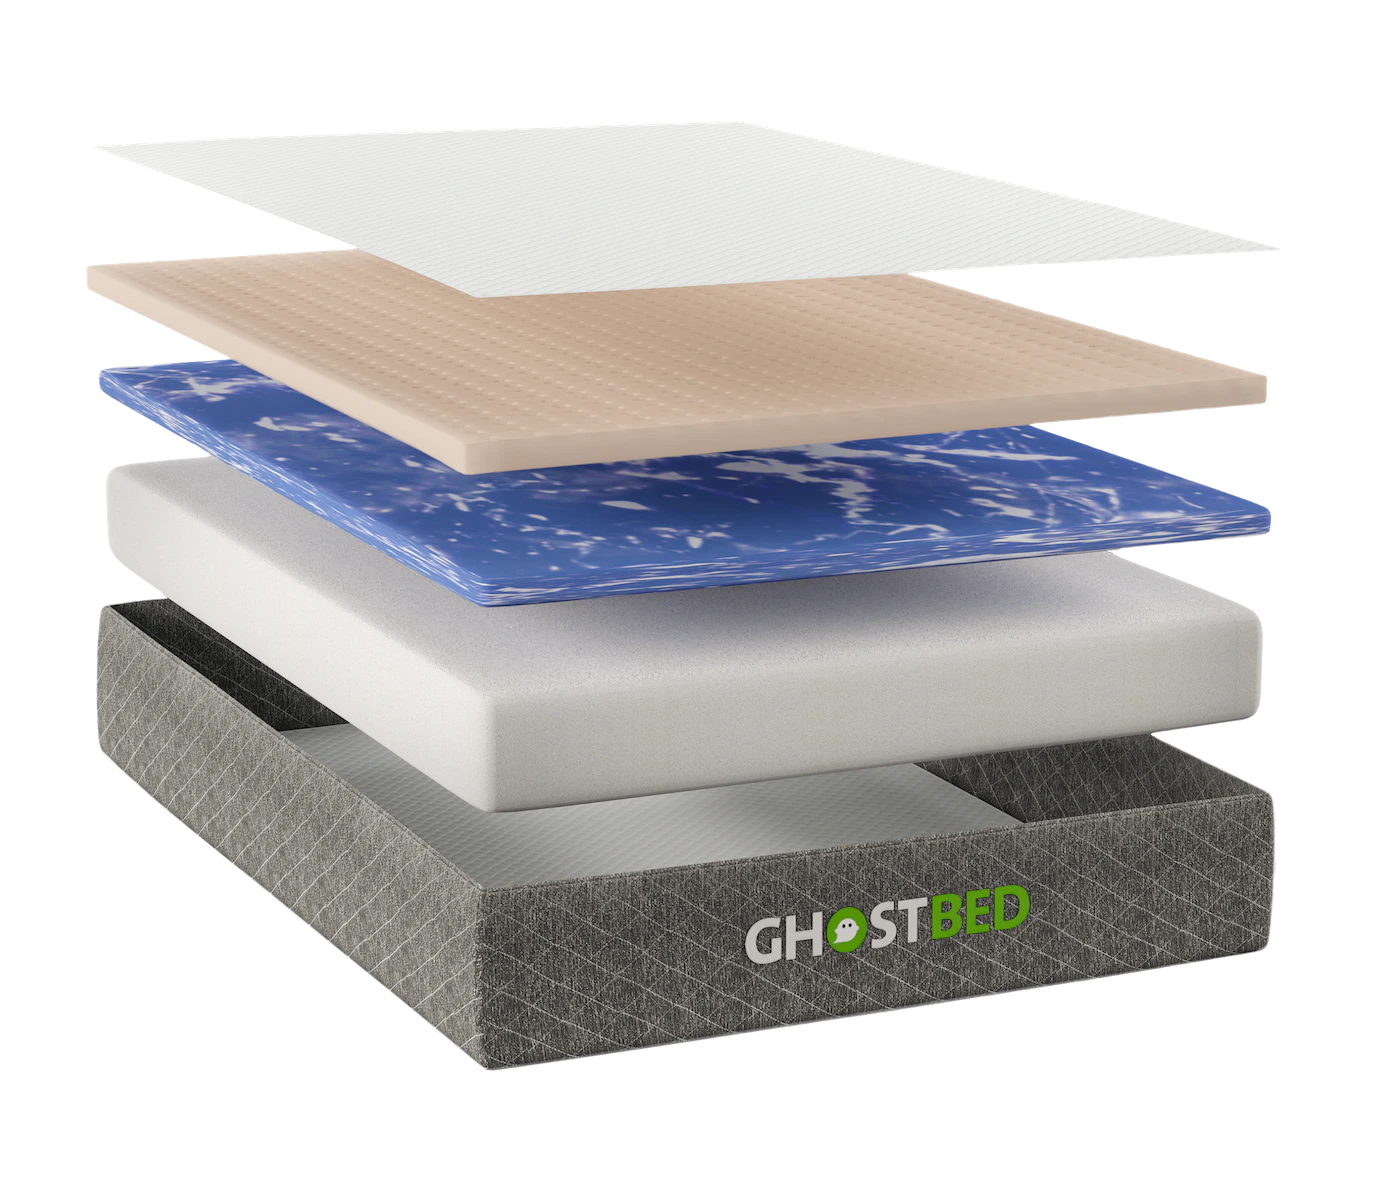 showing GhostBed layers